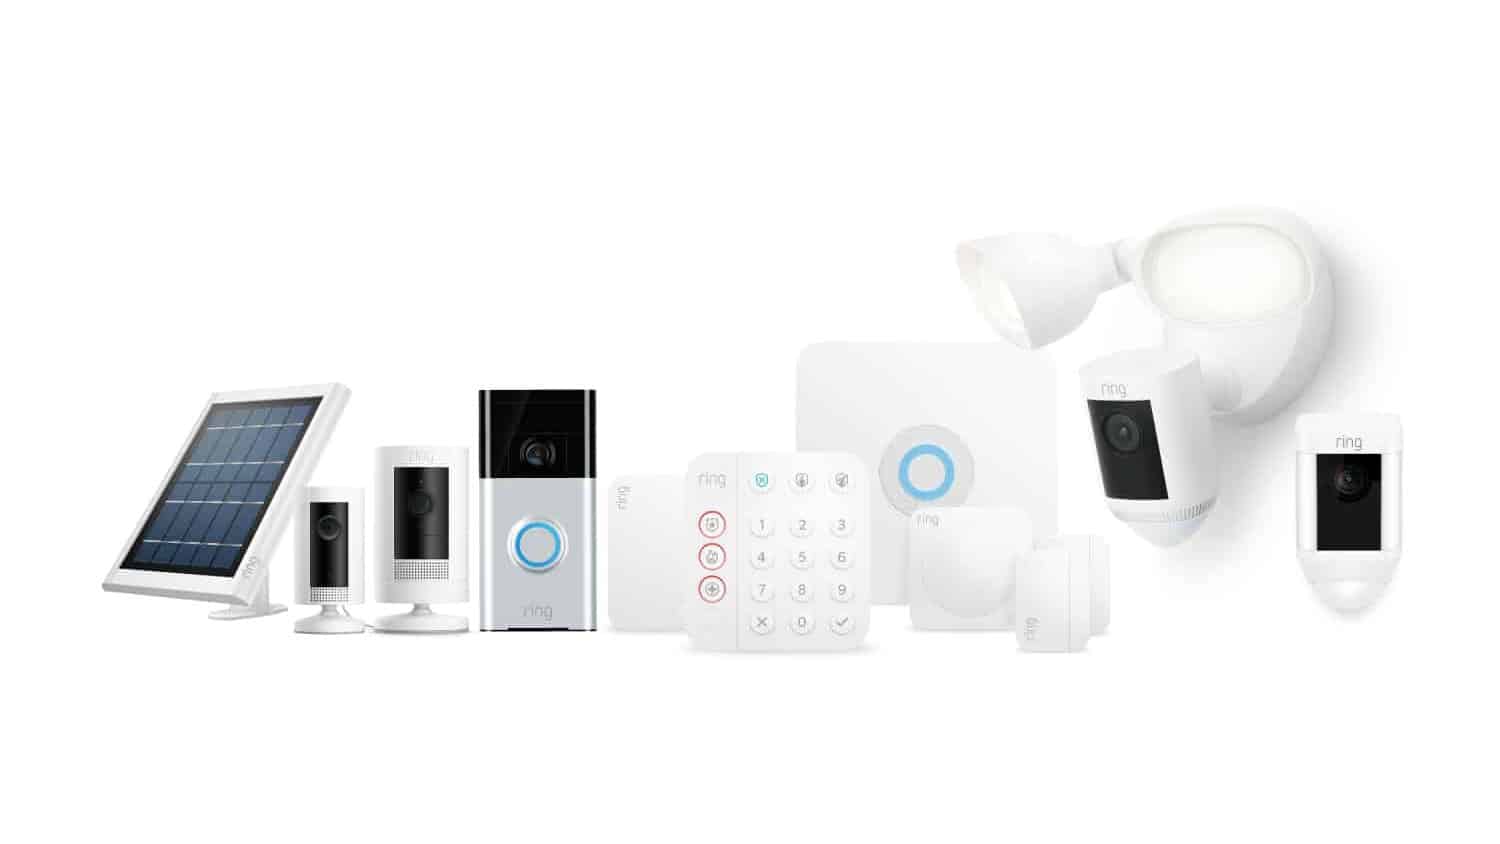 Ring Smart Security Devices include Video Doorbells, Security Cameras and Alarm System